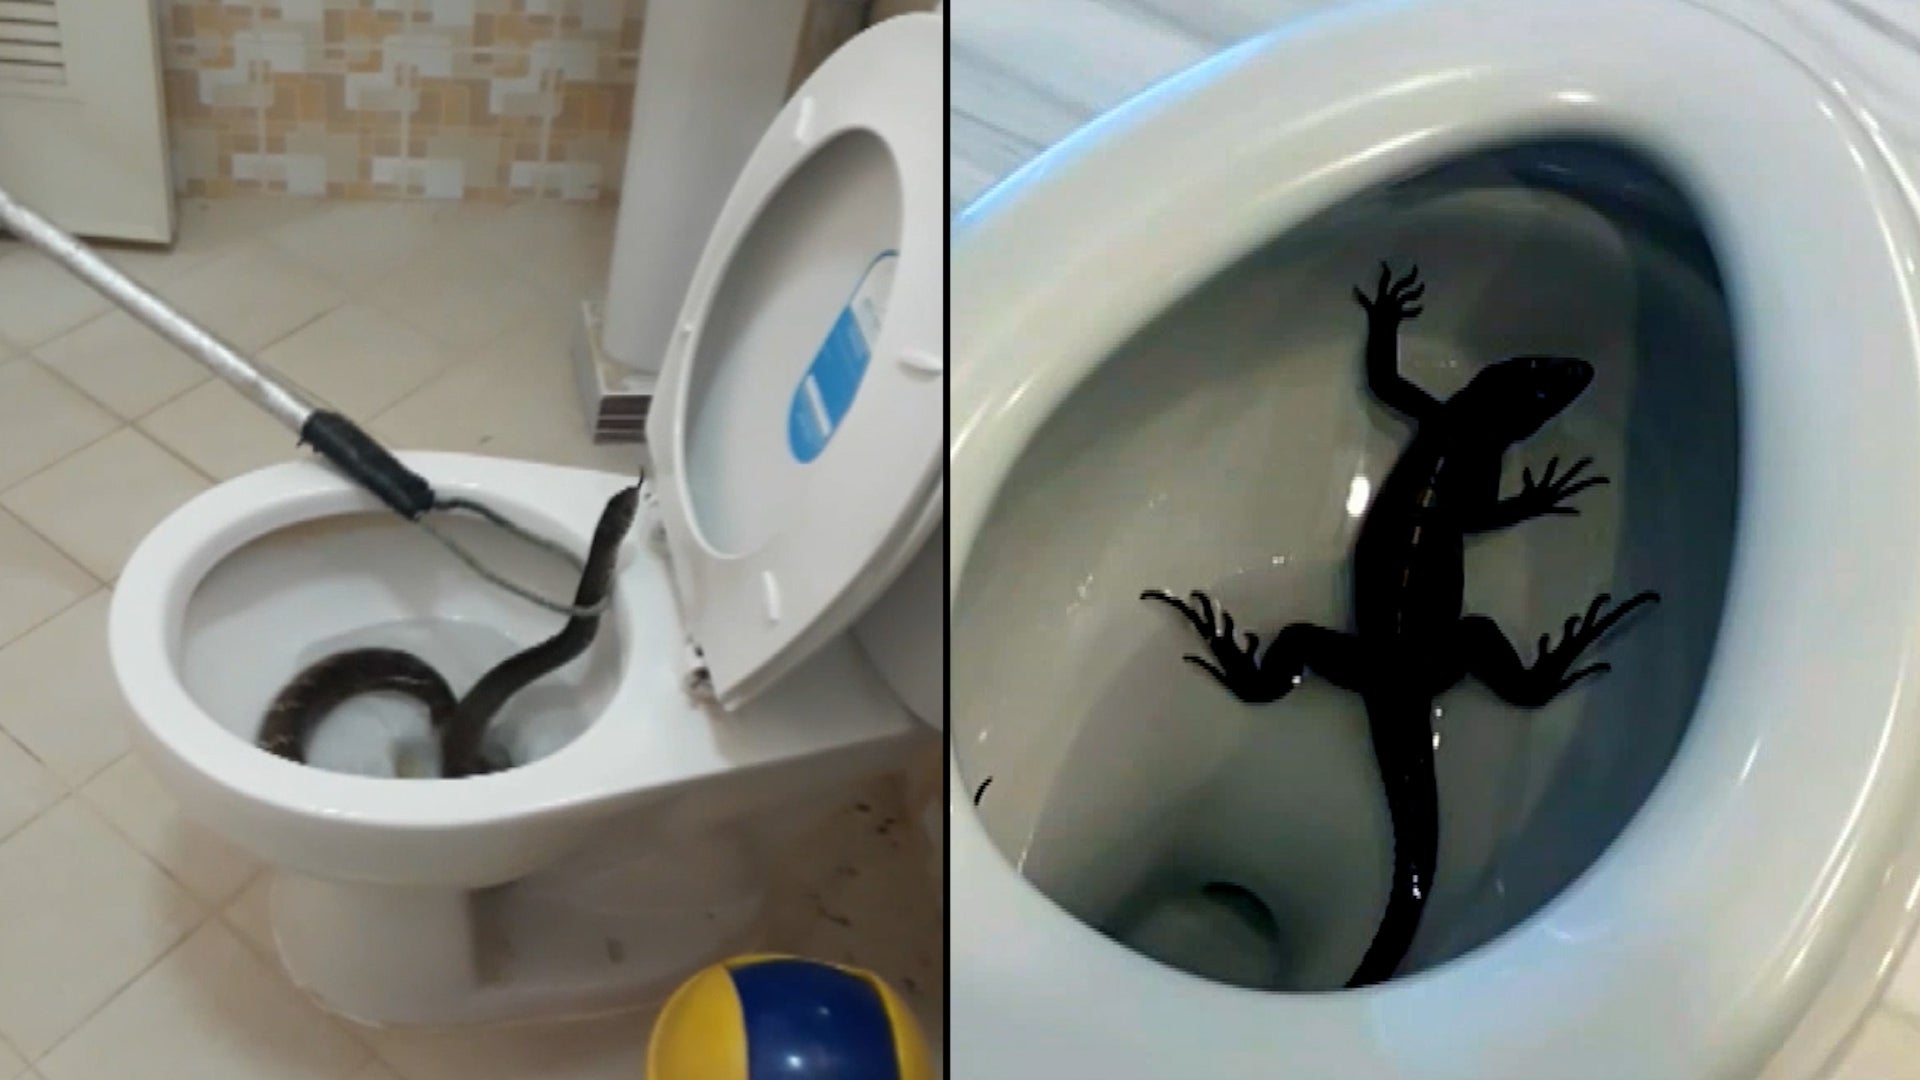 Snake In The Toilet Through The Septic? • Martin Septic Service